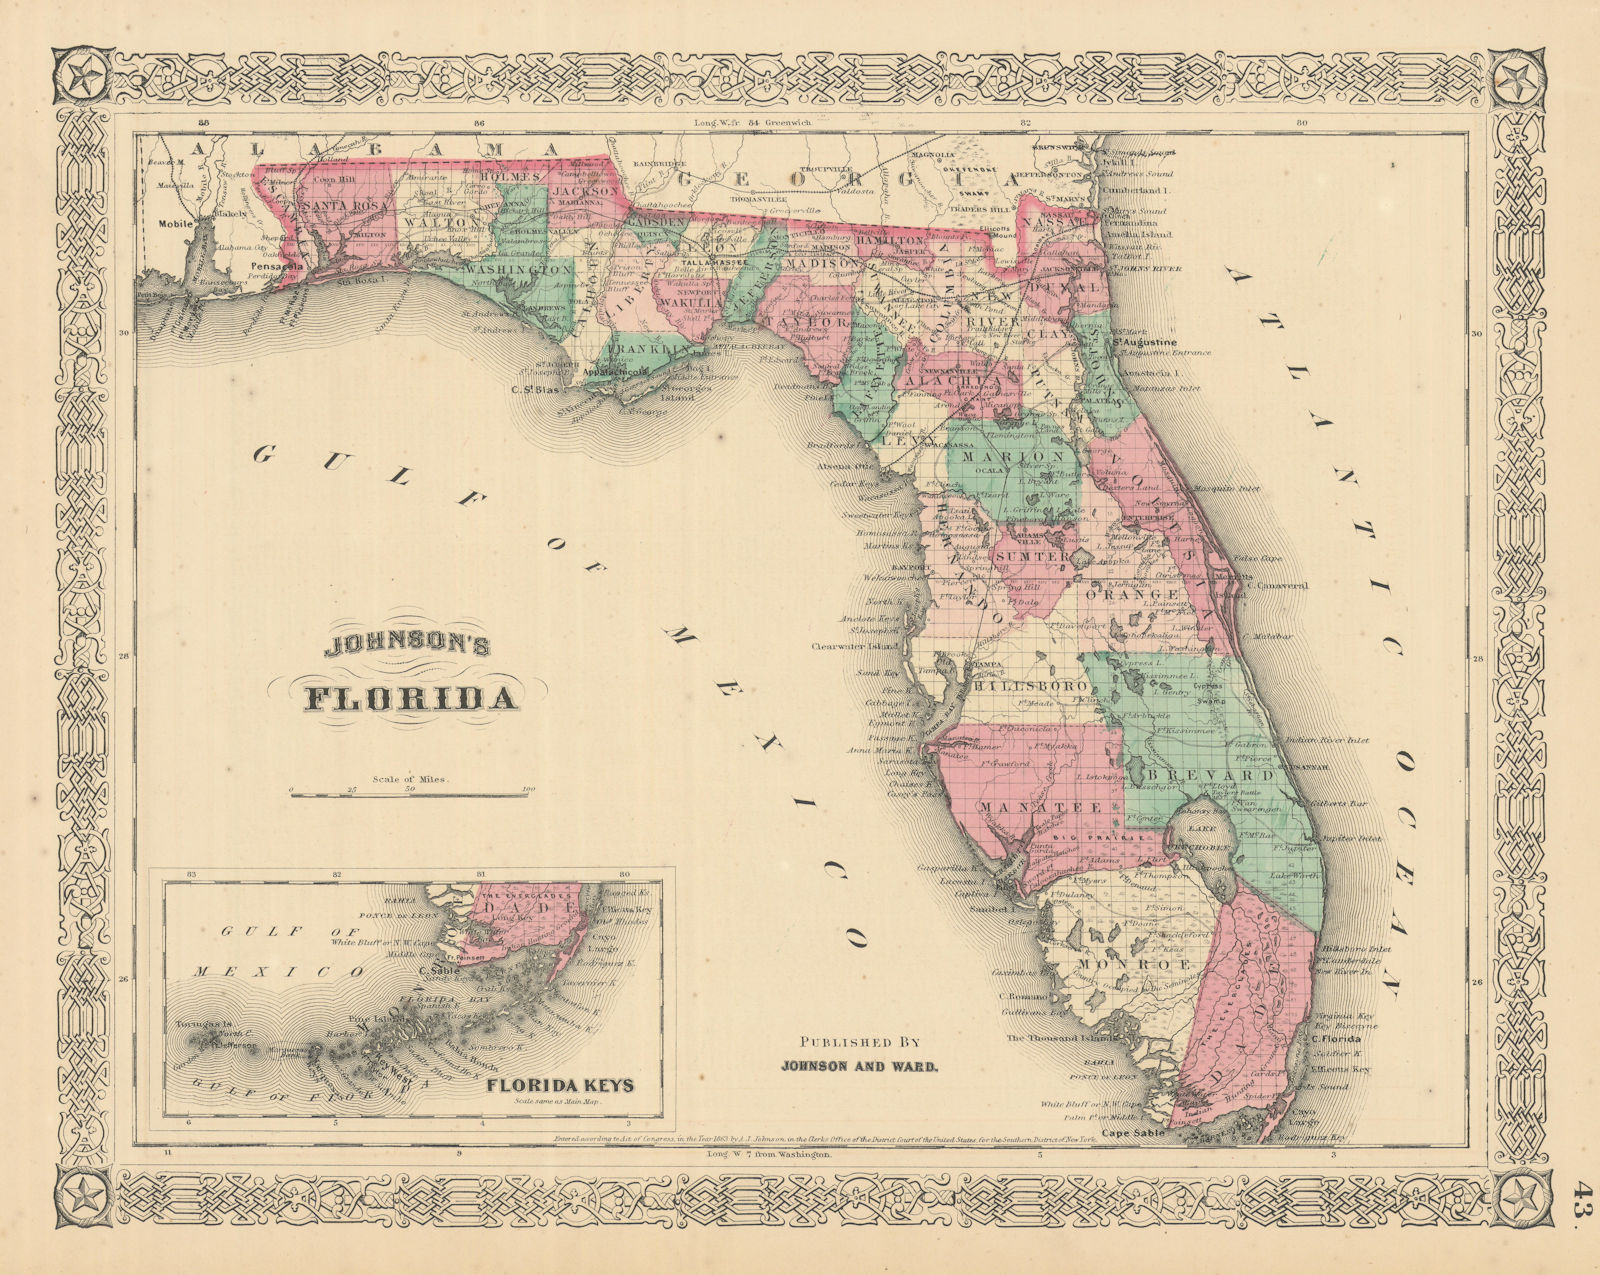 Johnson's Florida. Florida Keys. US state map showing counties 1866 old